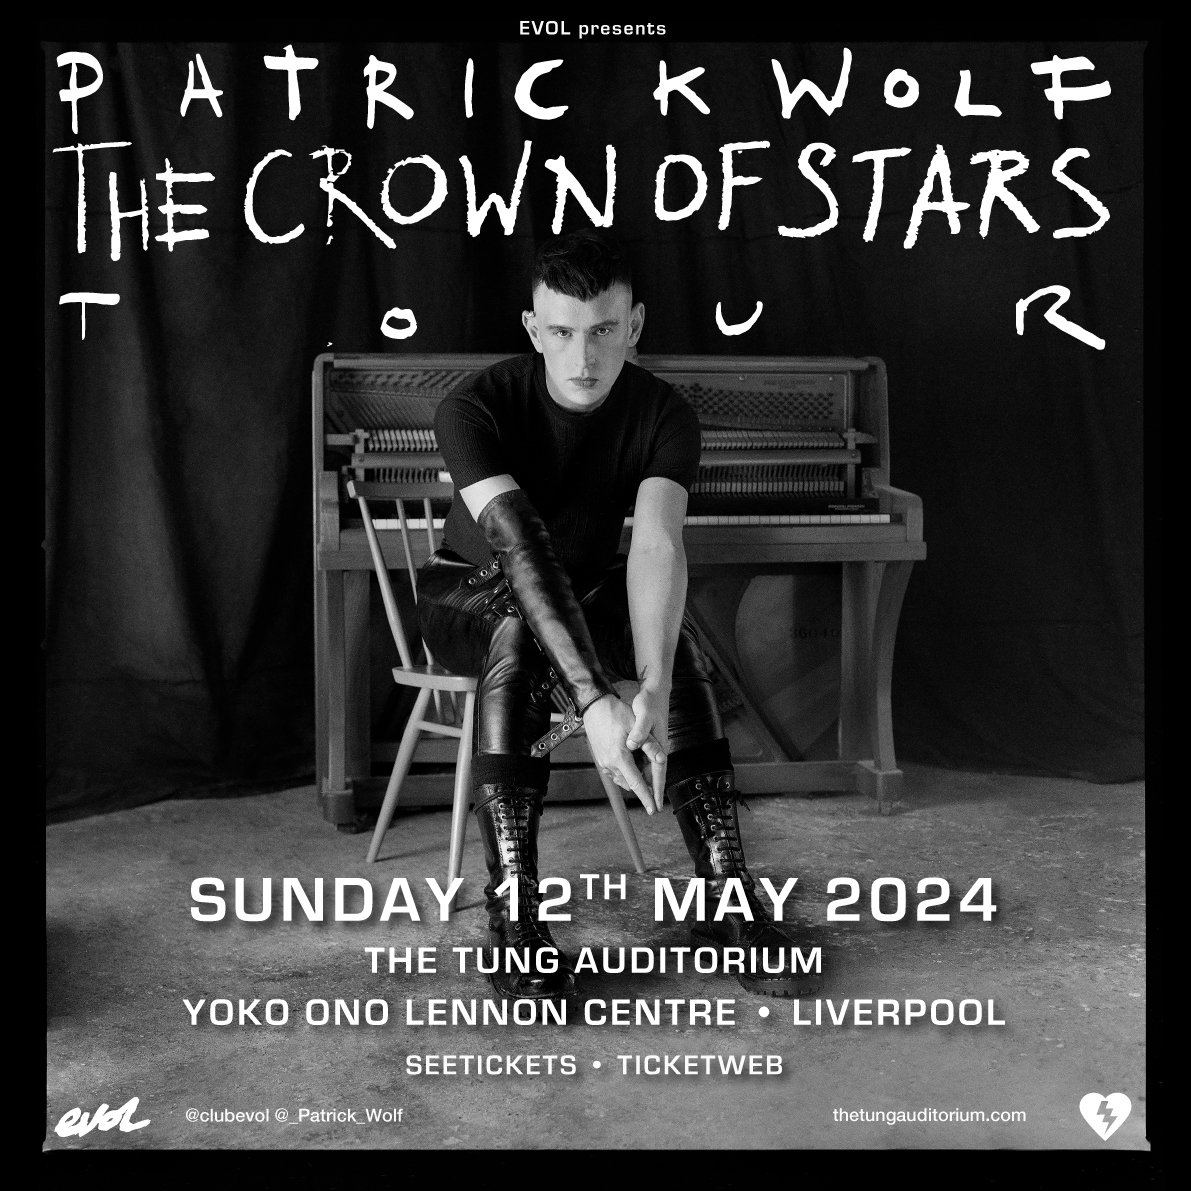 𝐓𝐇𝐄 𝐎𝐍𝐋𝐘 𝐔𝐊 𝐒𝐇𝐎𝐖 Critically-acclaimed & adored artiste @_PATRICK_WOLF plays a seated piano show at Liverpool's @TungAuditorium, Yoko Ono Lennon Centre, Sunday May 12th as part of the Crown Of Stars tour. Tickets flying. Get them @seetickets: seetickets.com/event/patrick-…